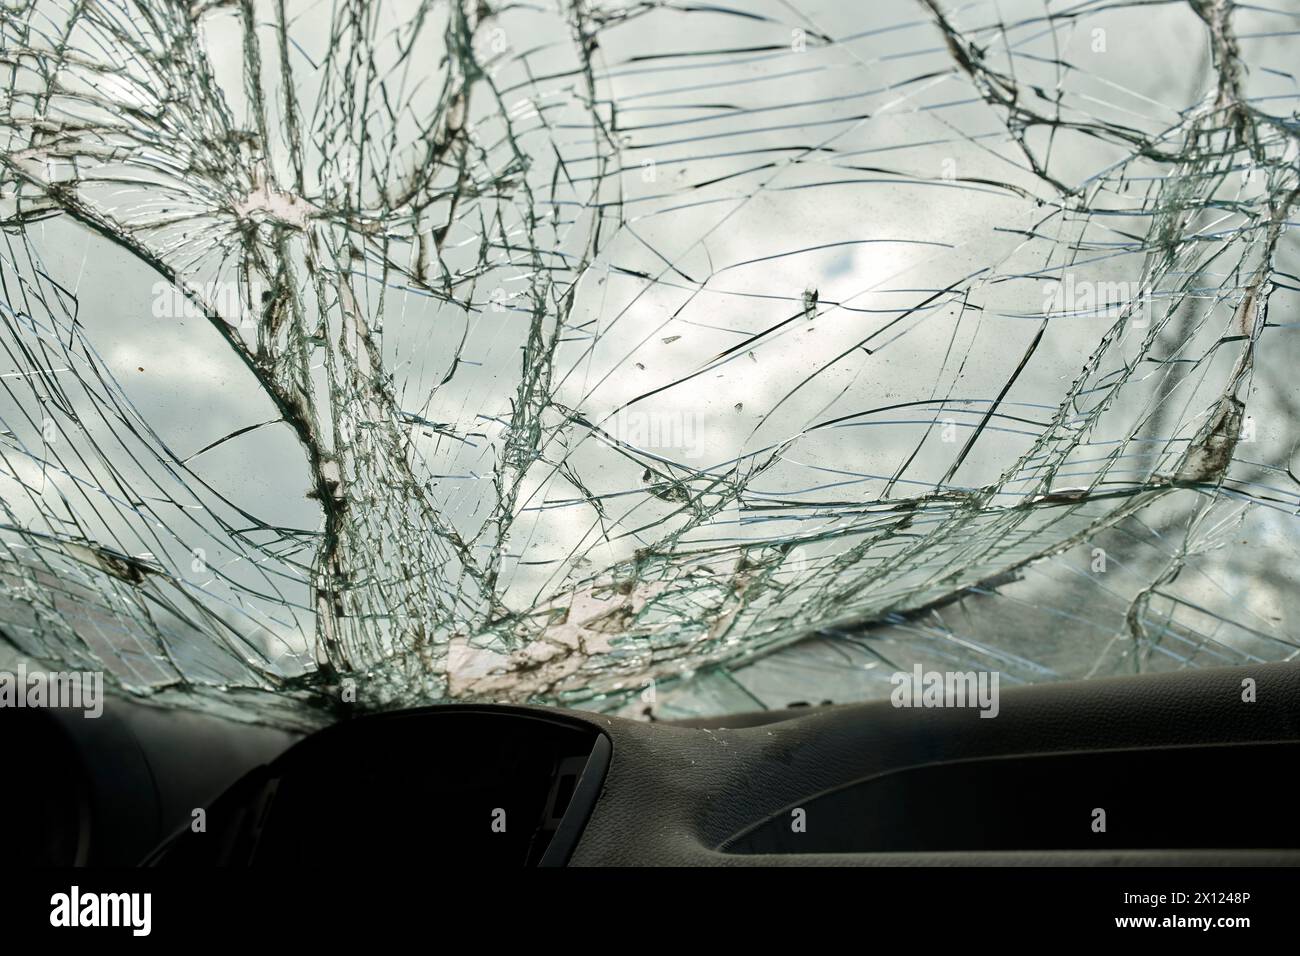 Broken glass texture, car windshield after traffic accident, shattered glass material background, selective focus Stock Photo